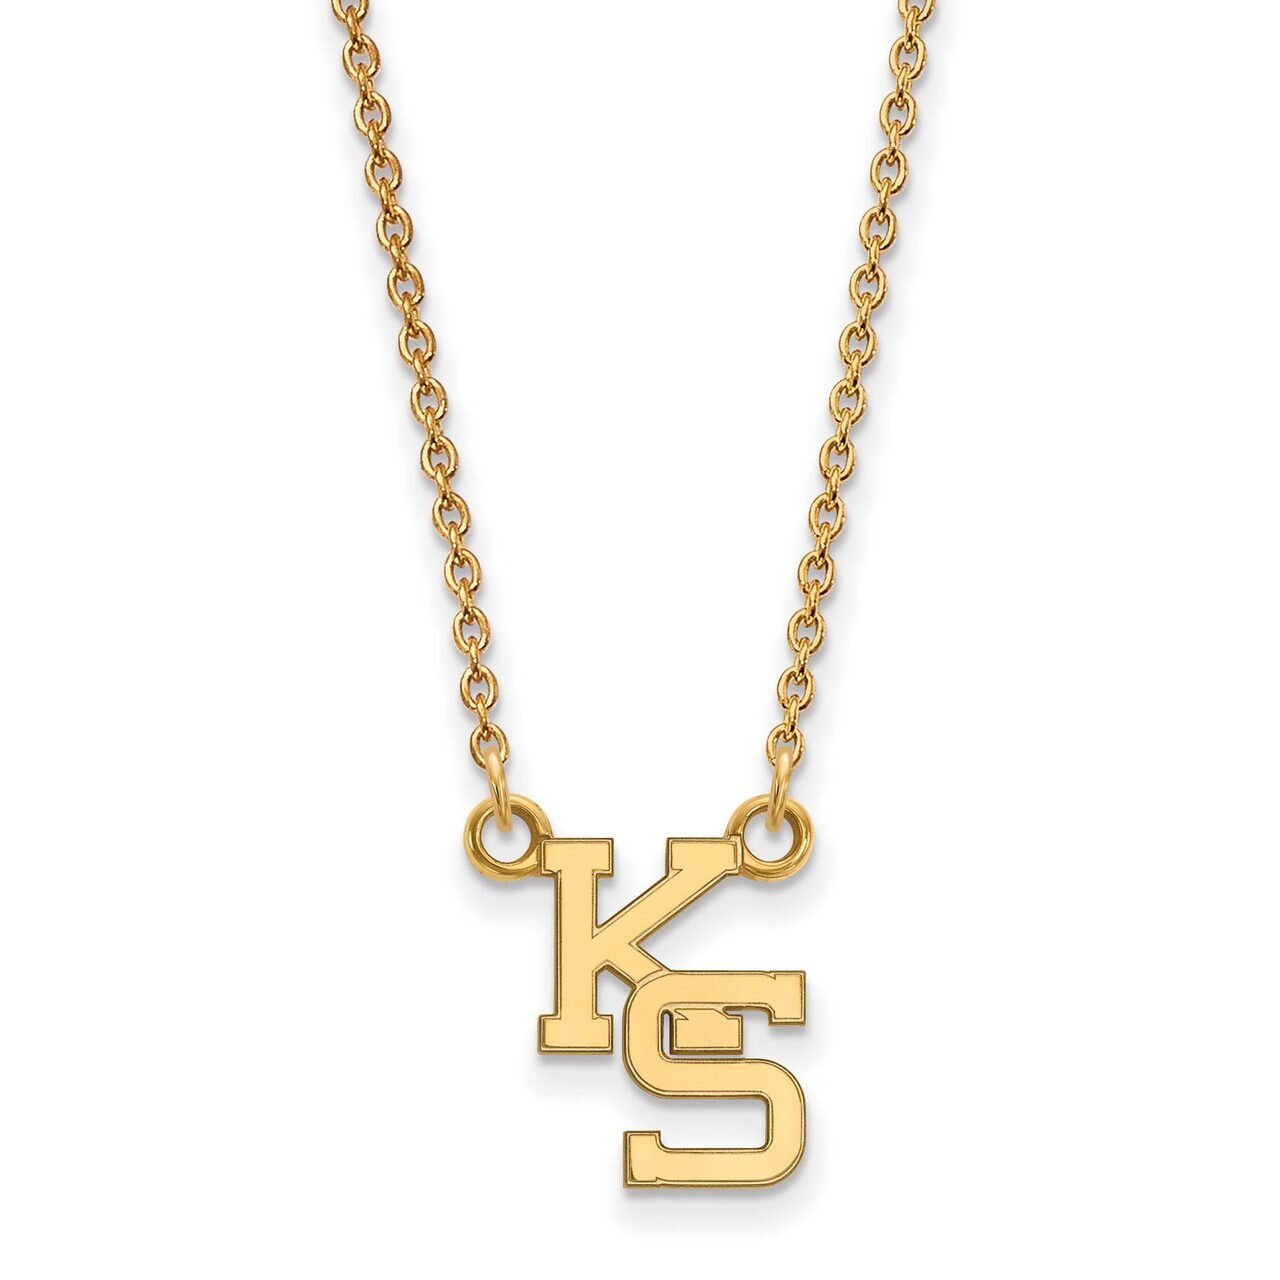 Kansas State University Small Pendant with Chain Necklace 14k Yellow Gold 4Y056KSU-18